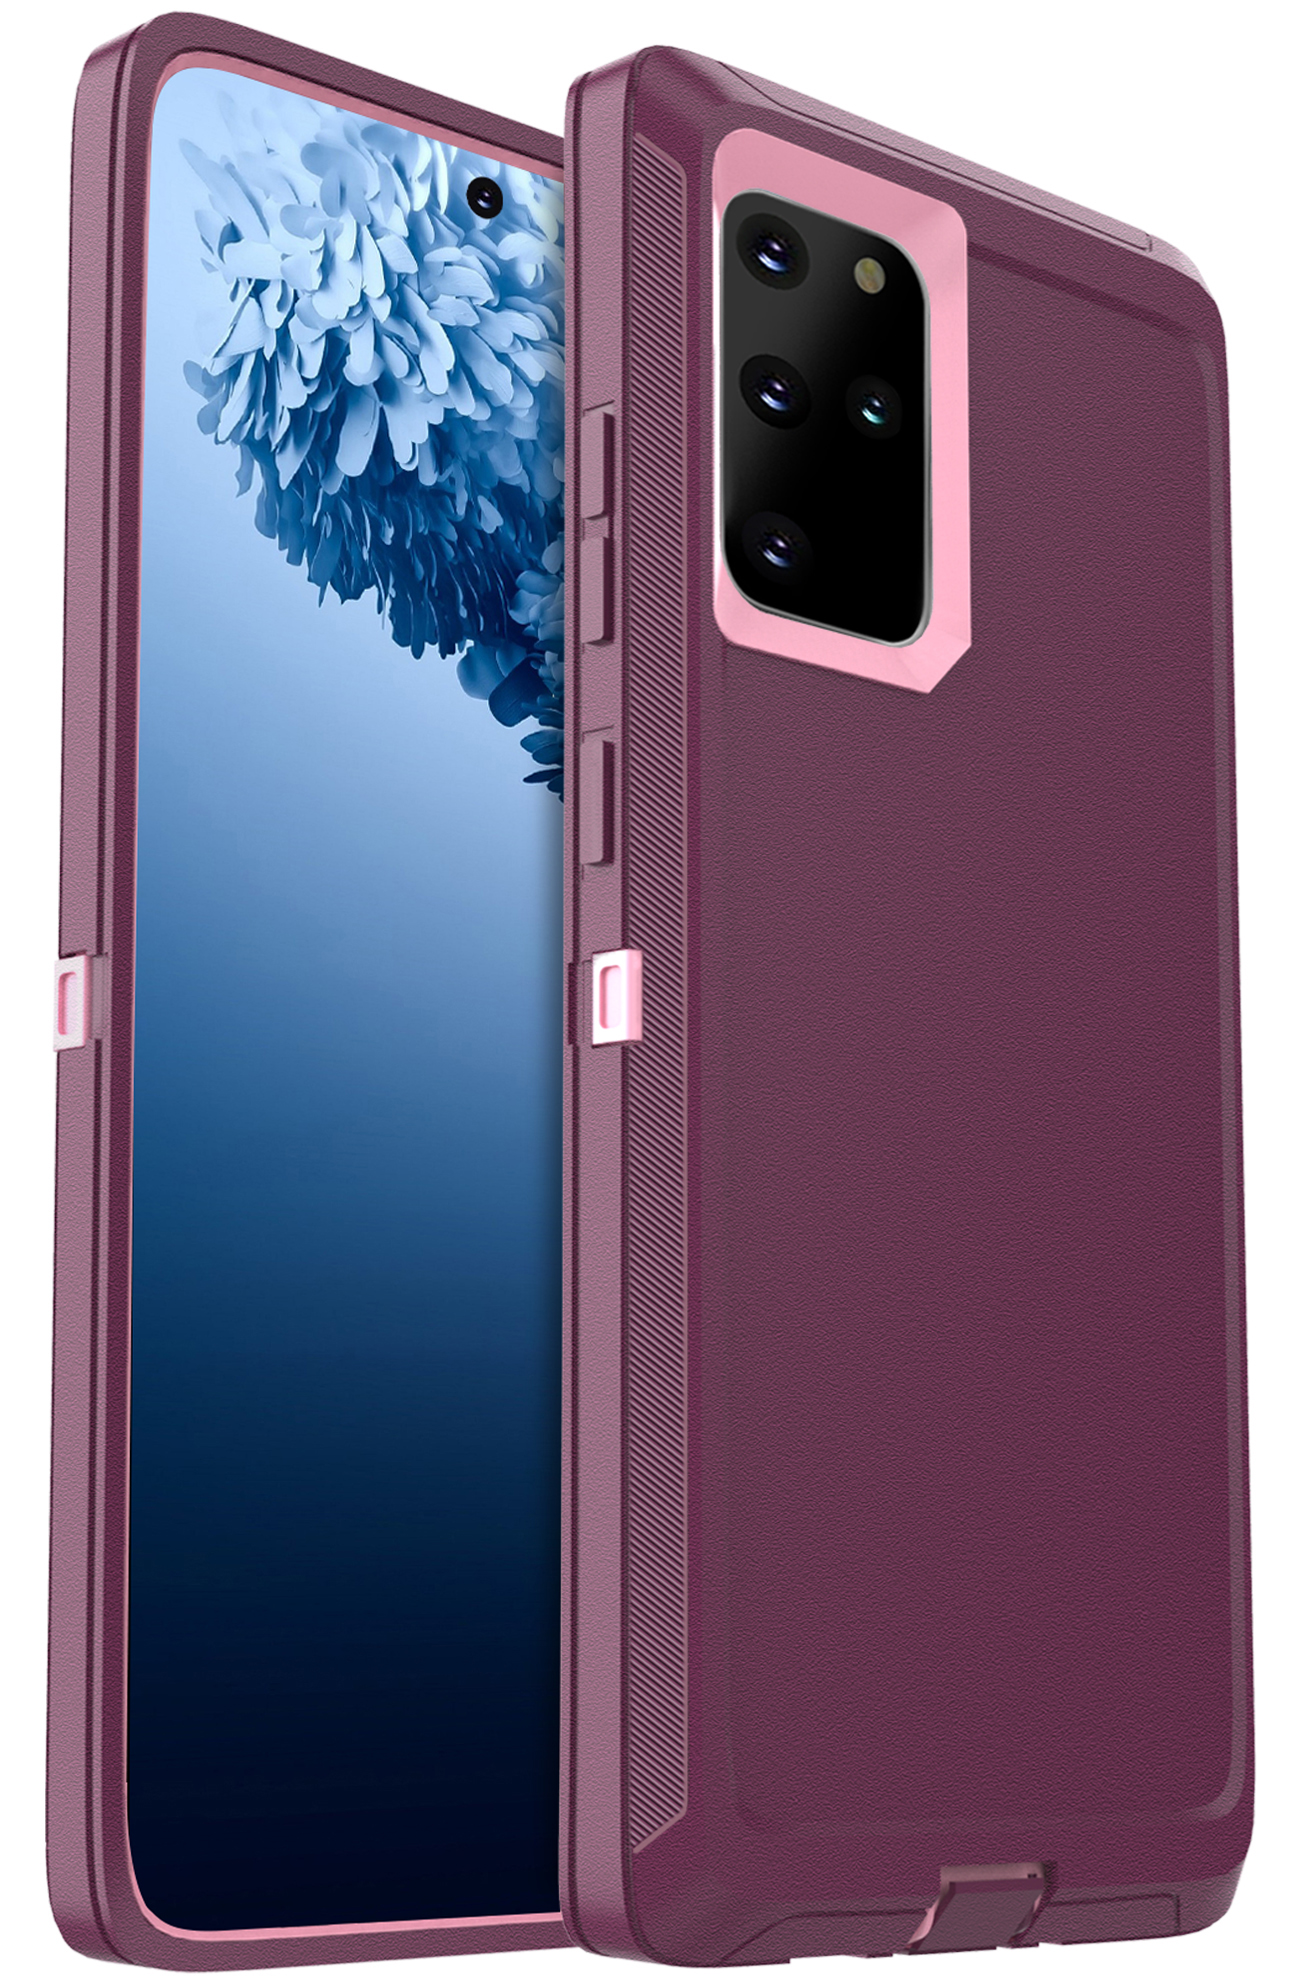 FOGEEK Compatible with Samsung Galaxy S20 Plus 5G Case, Heavy Duty Rugged Case, Protective Cover (Shockproof)(Drop Proof) Case for Galaxy S20+ 5G (6.7 inch) 2020 (Wine/Pink)